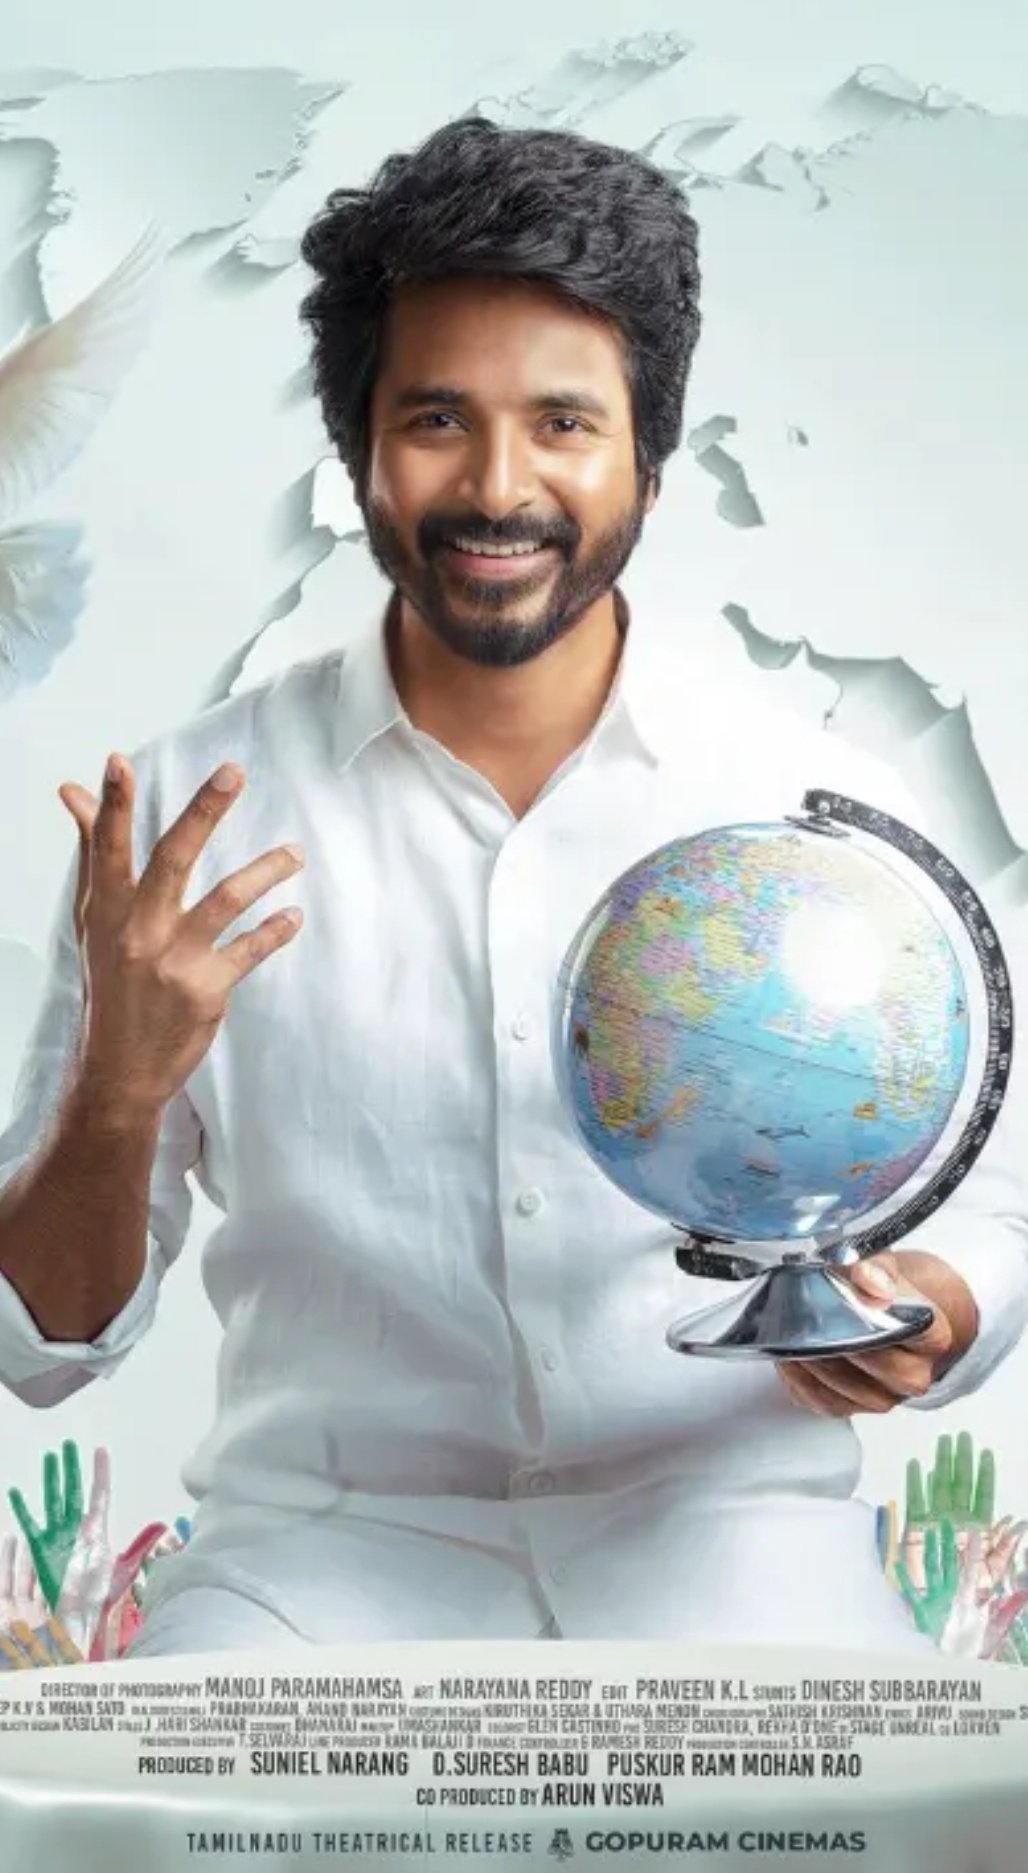 Sivakarthikeyan SK20 Prince Movie First Look Poster Released